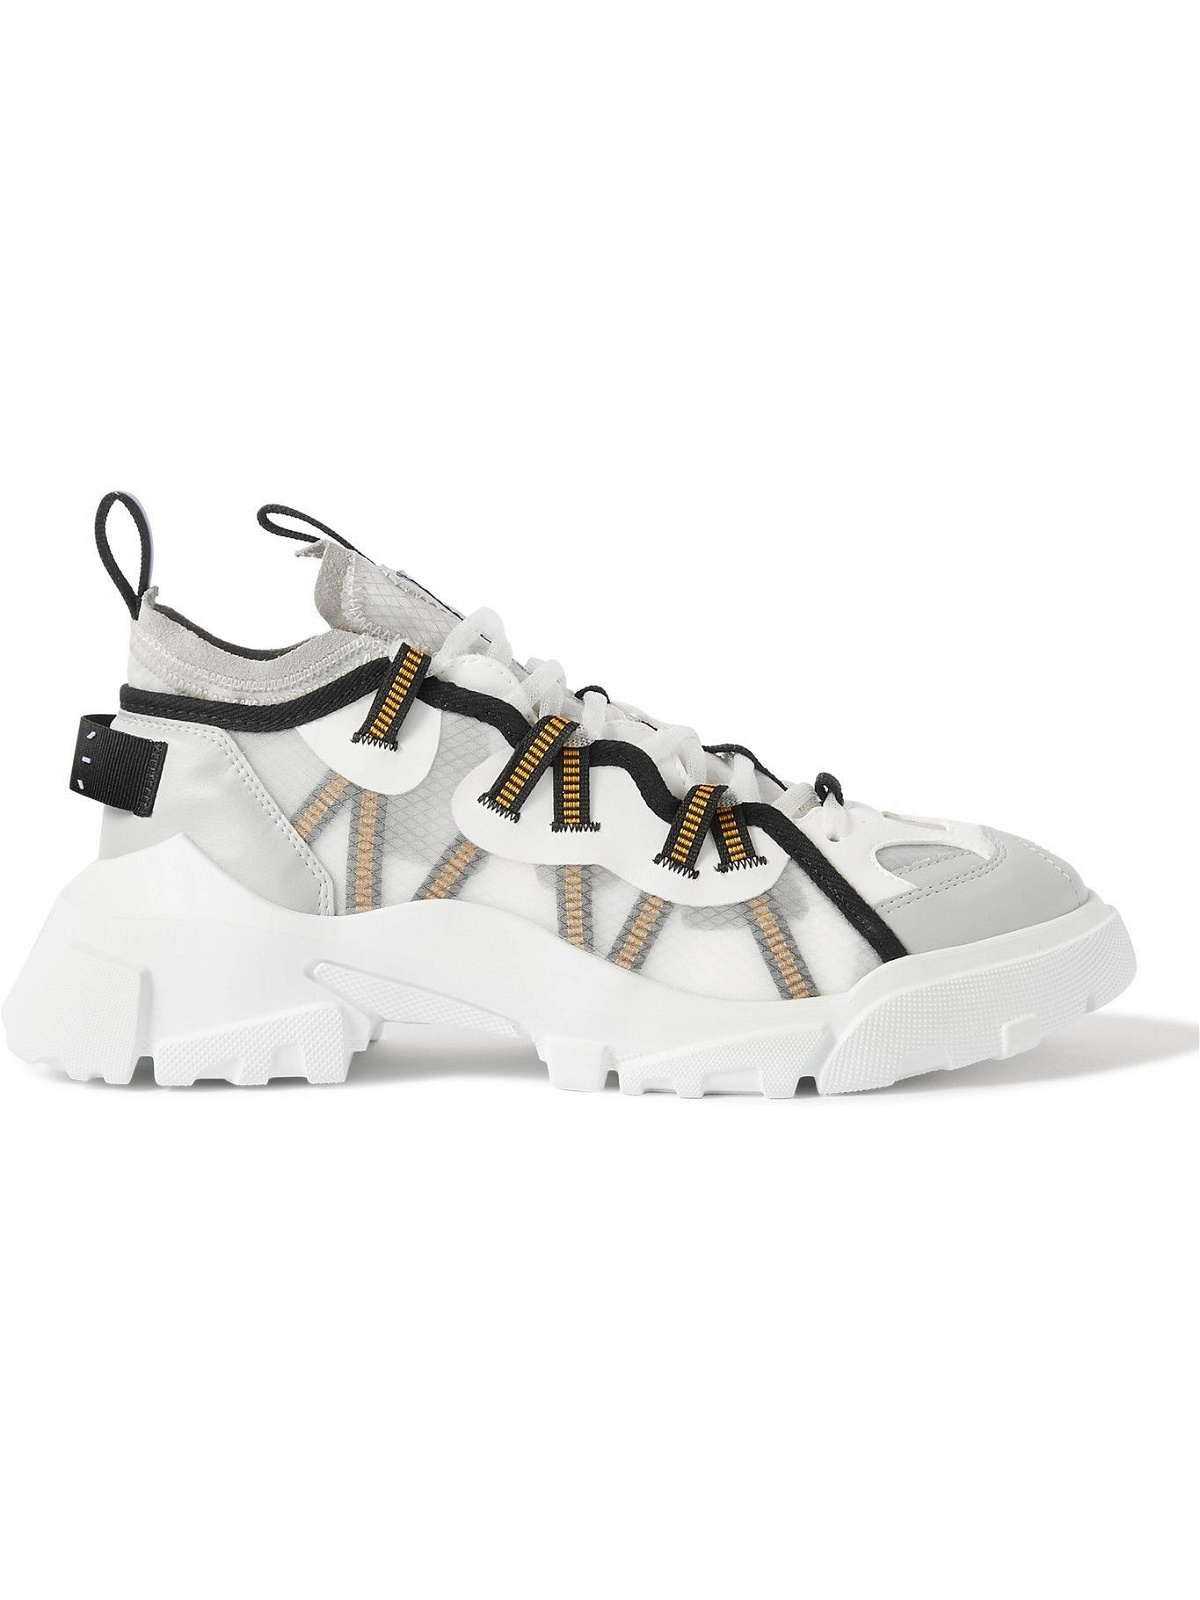 Photo: MCQ - Breathe BR-7 Orbyt Descender Leather-Trimmed Ripstop Sneakers - White